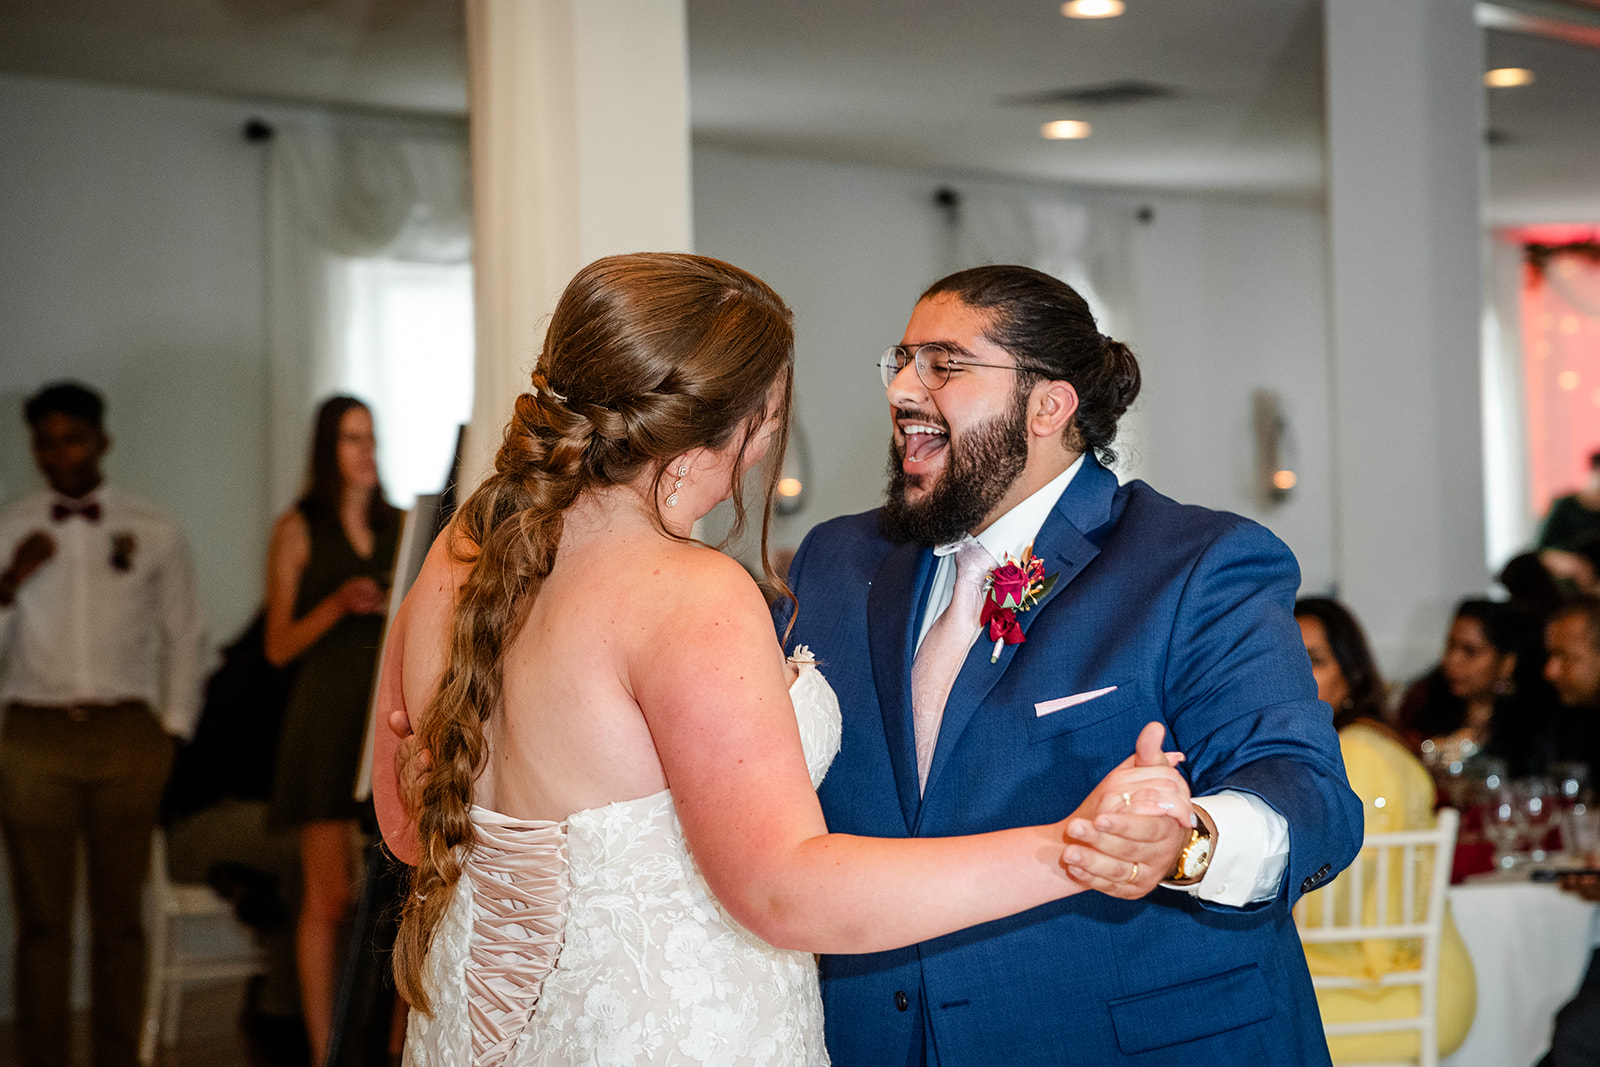 Groom smiling during first dance